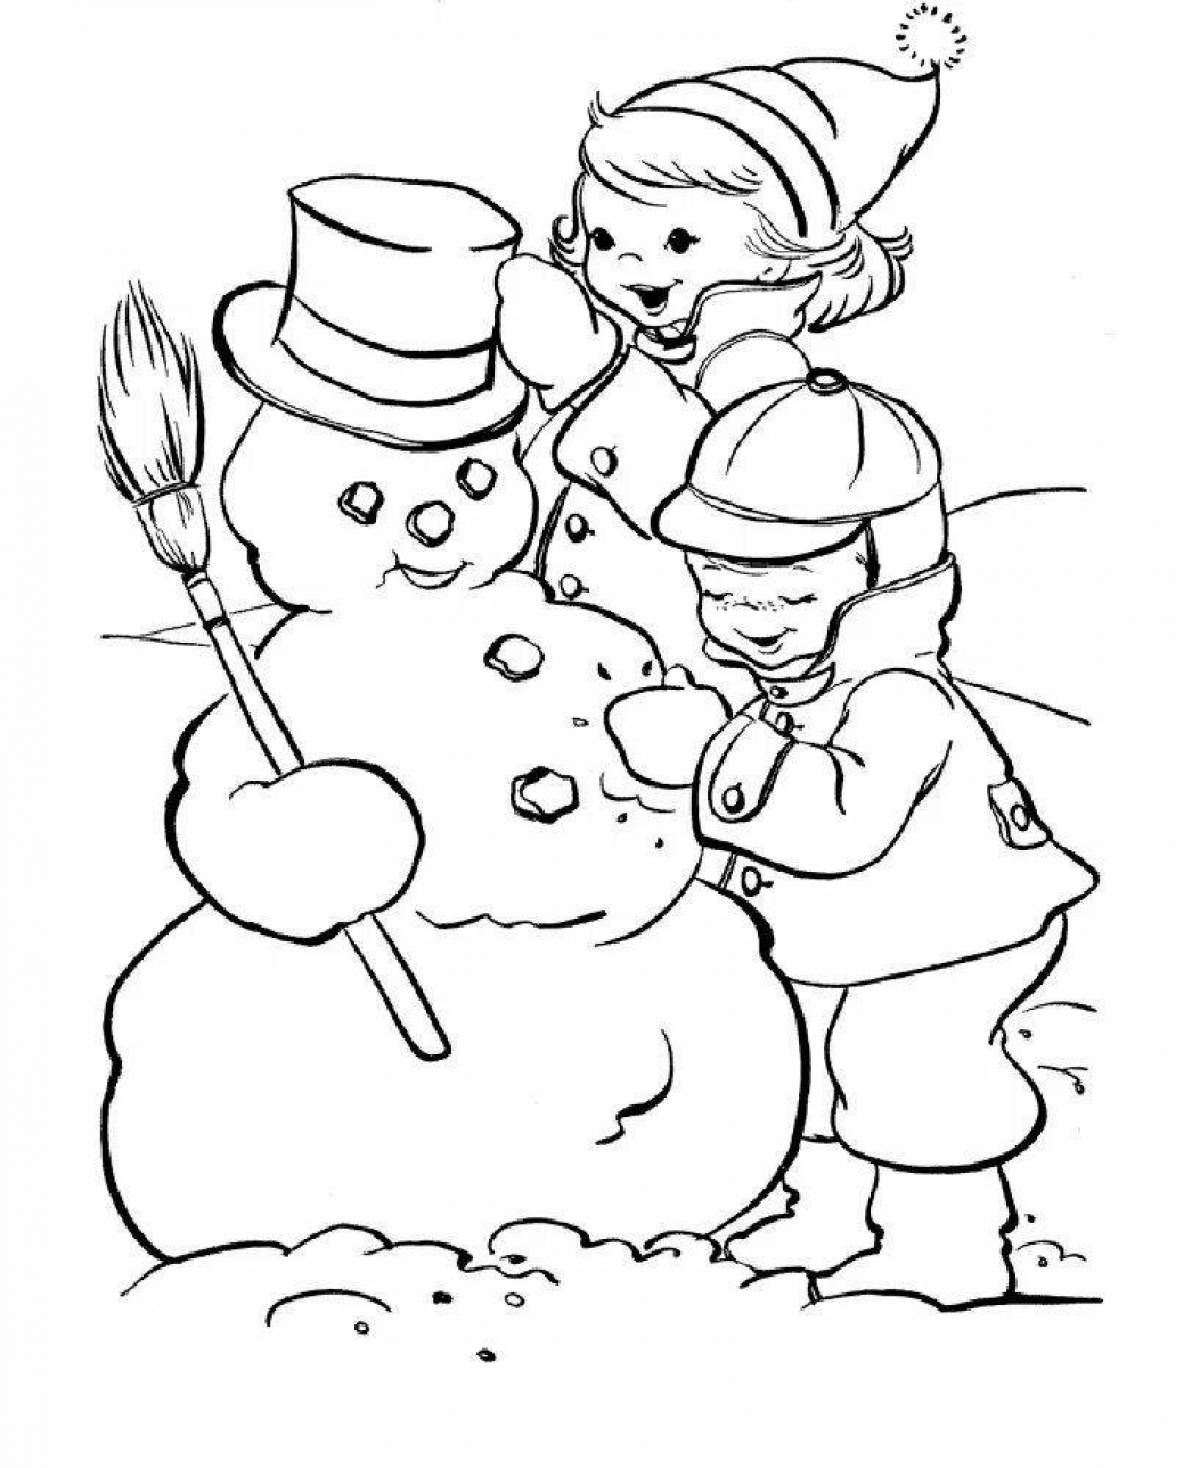 Playful snowman coloring for kids